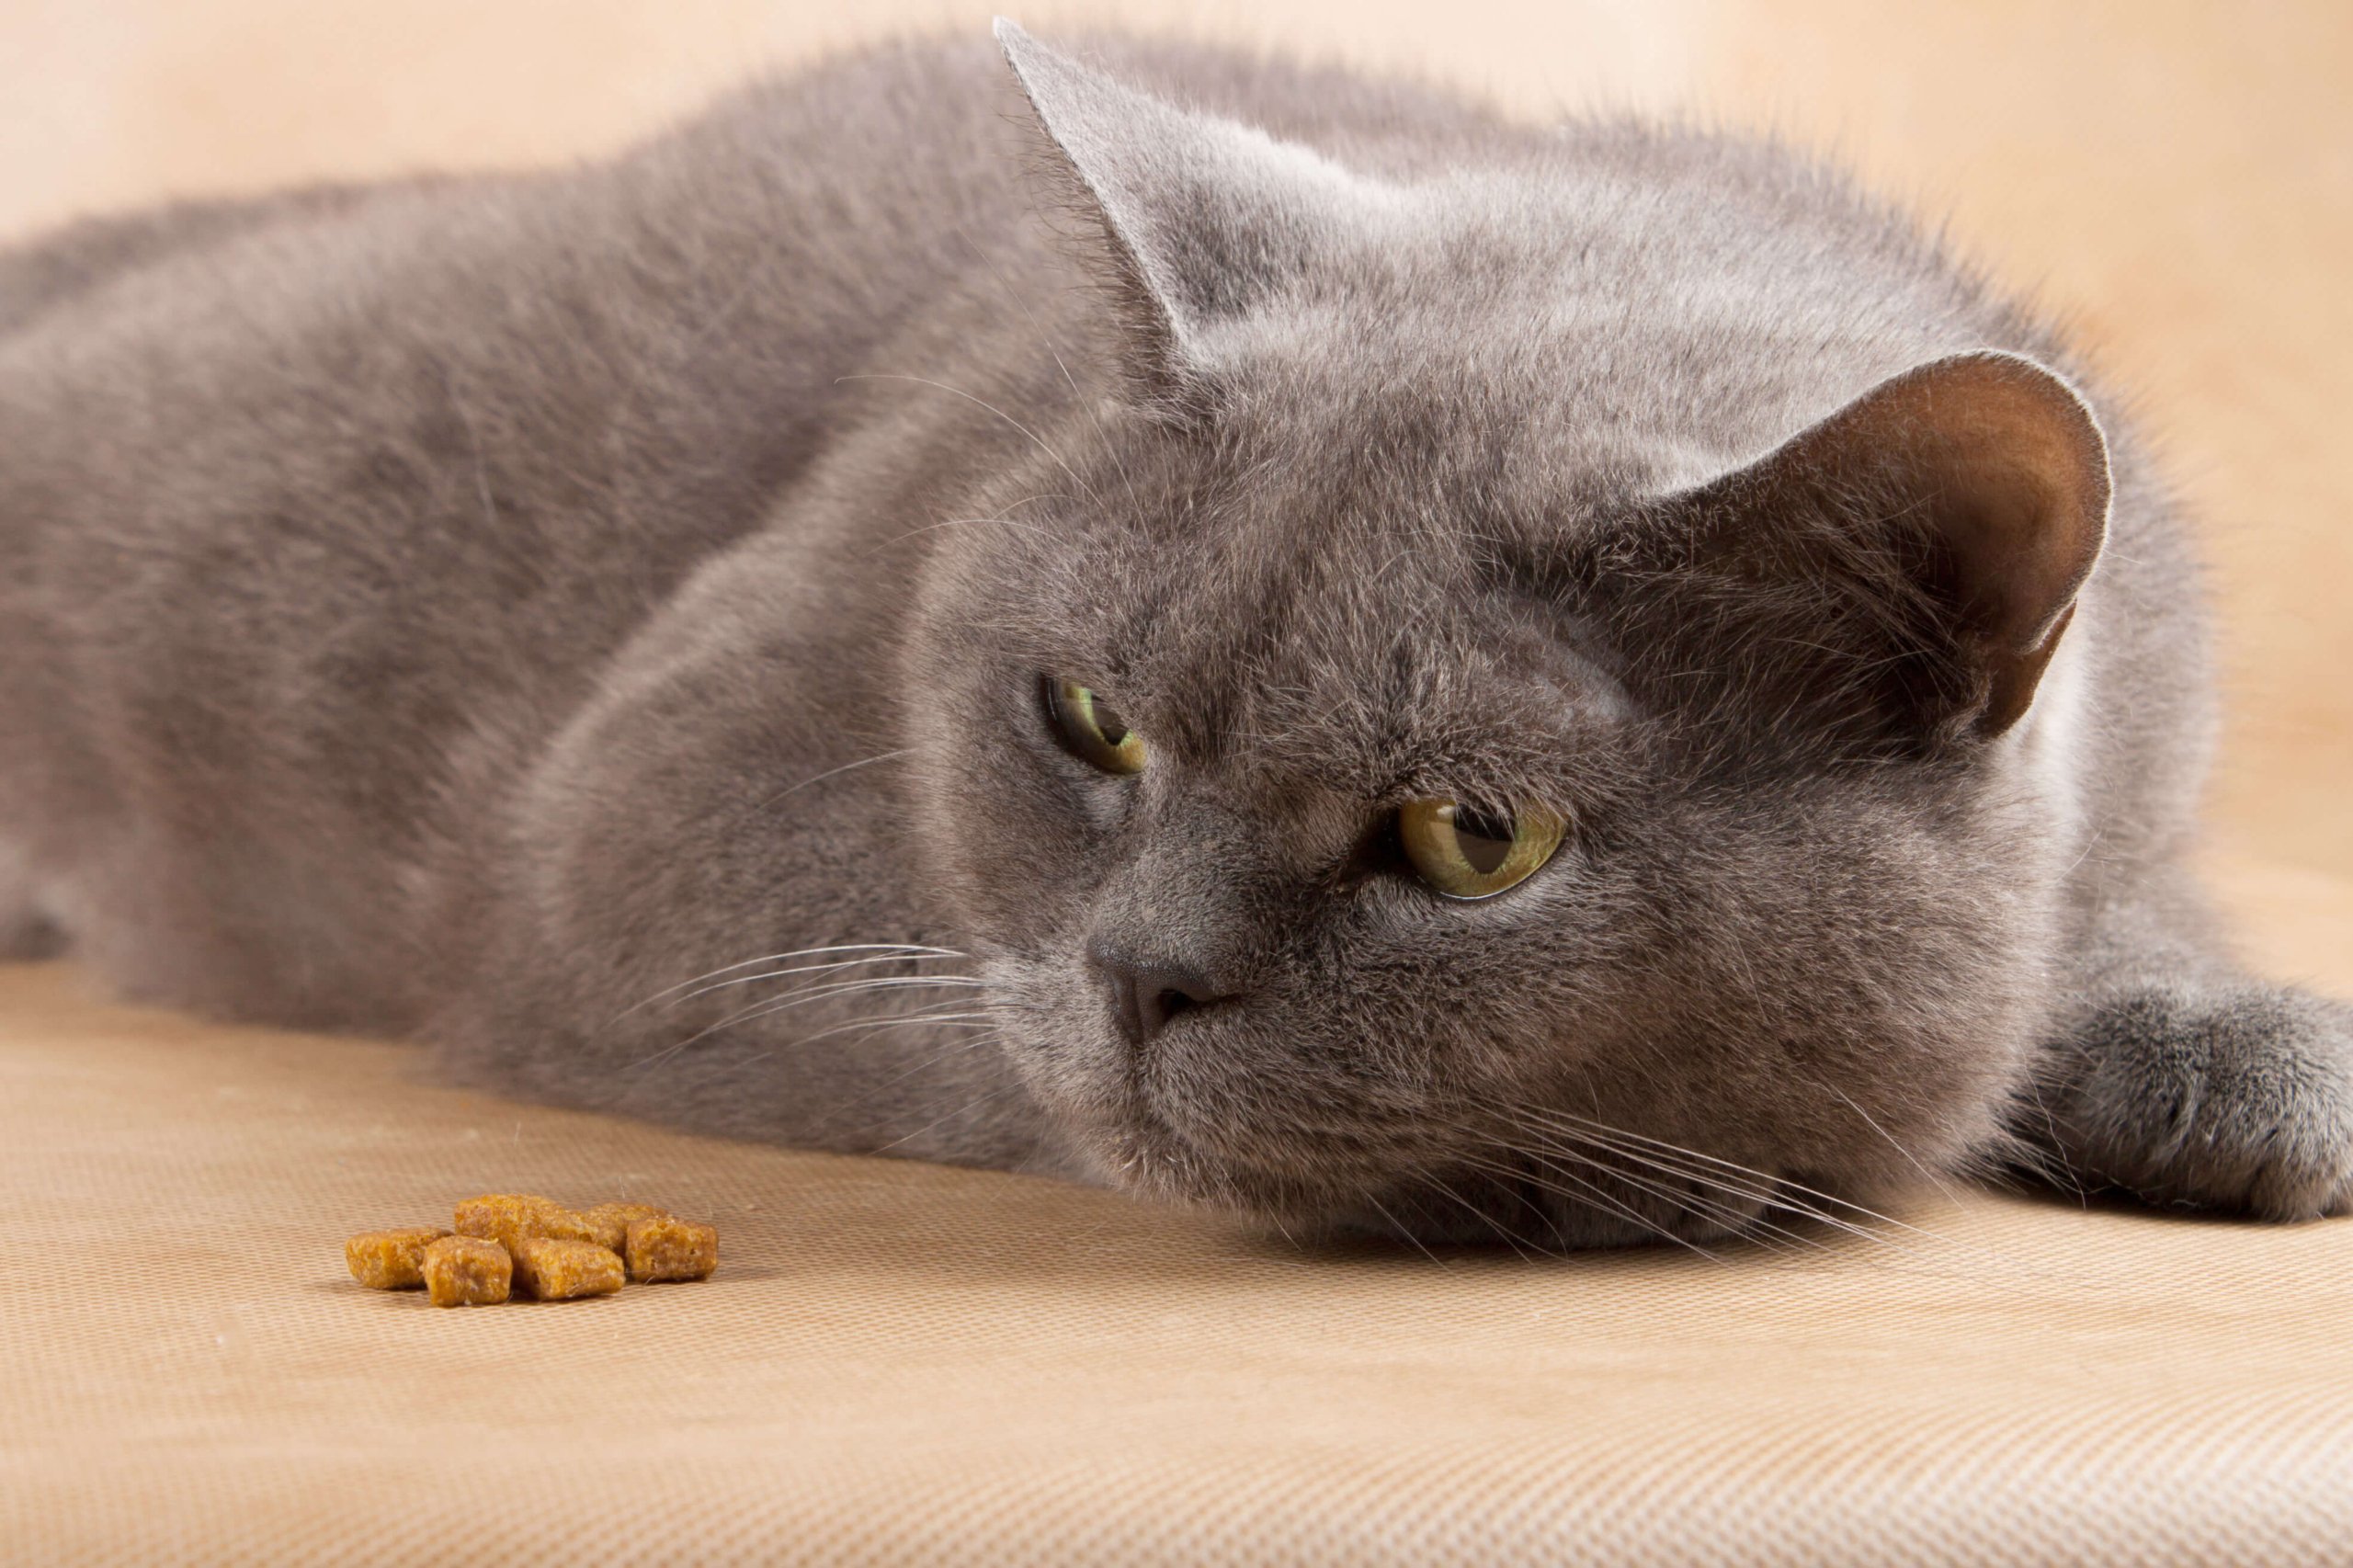 How do I know if my cat is feeling unwell?